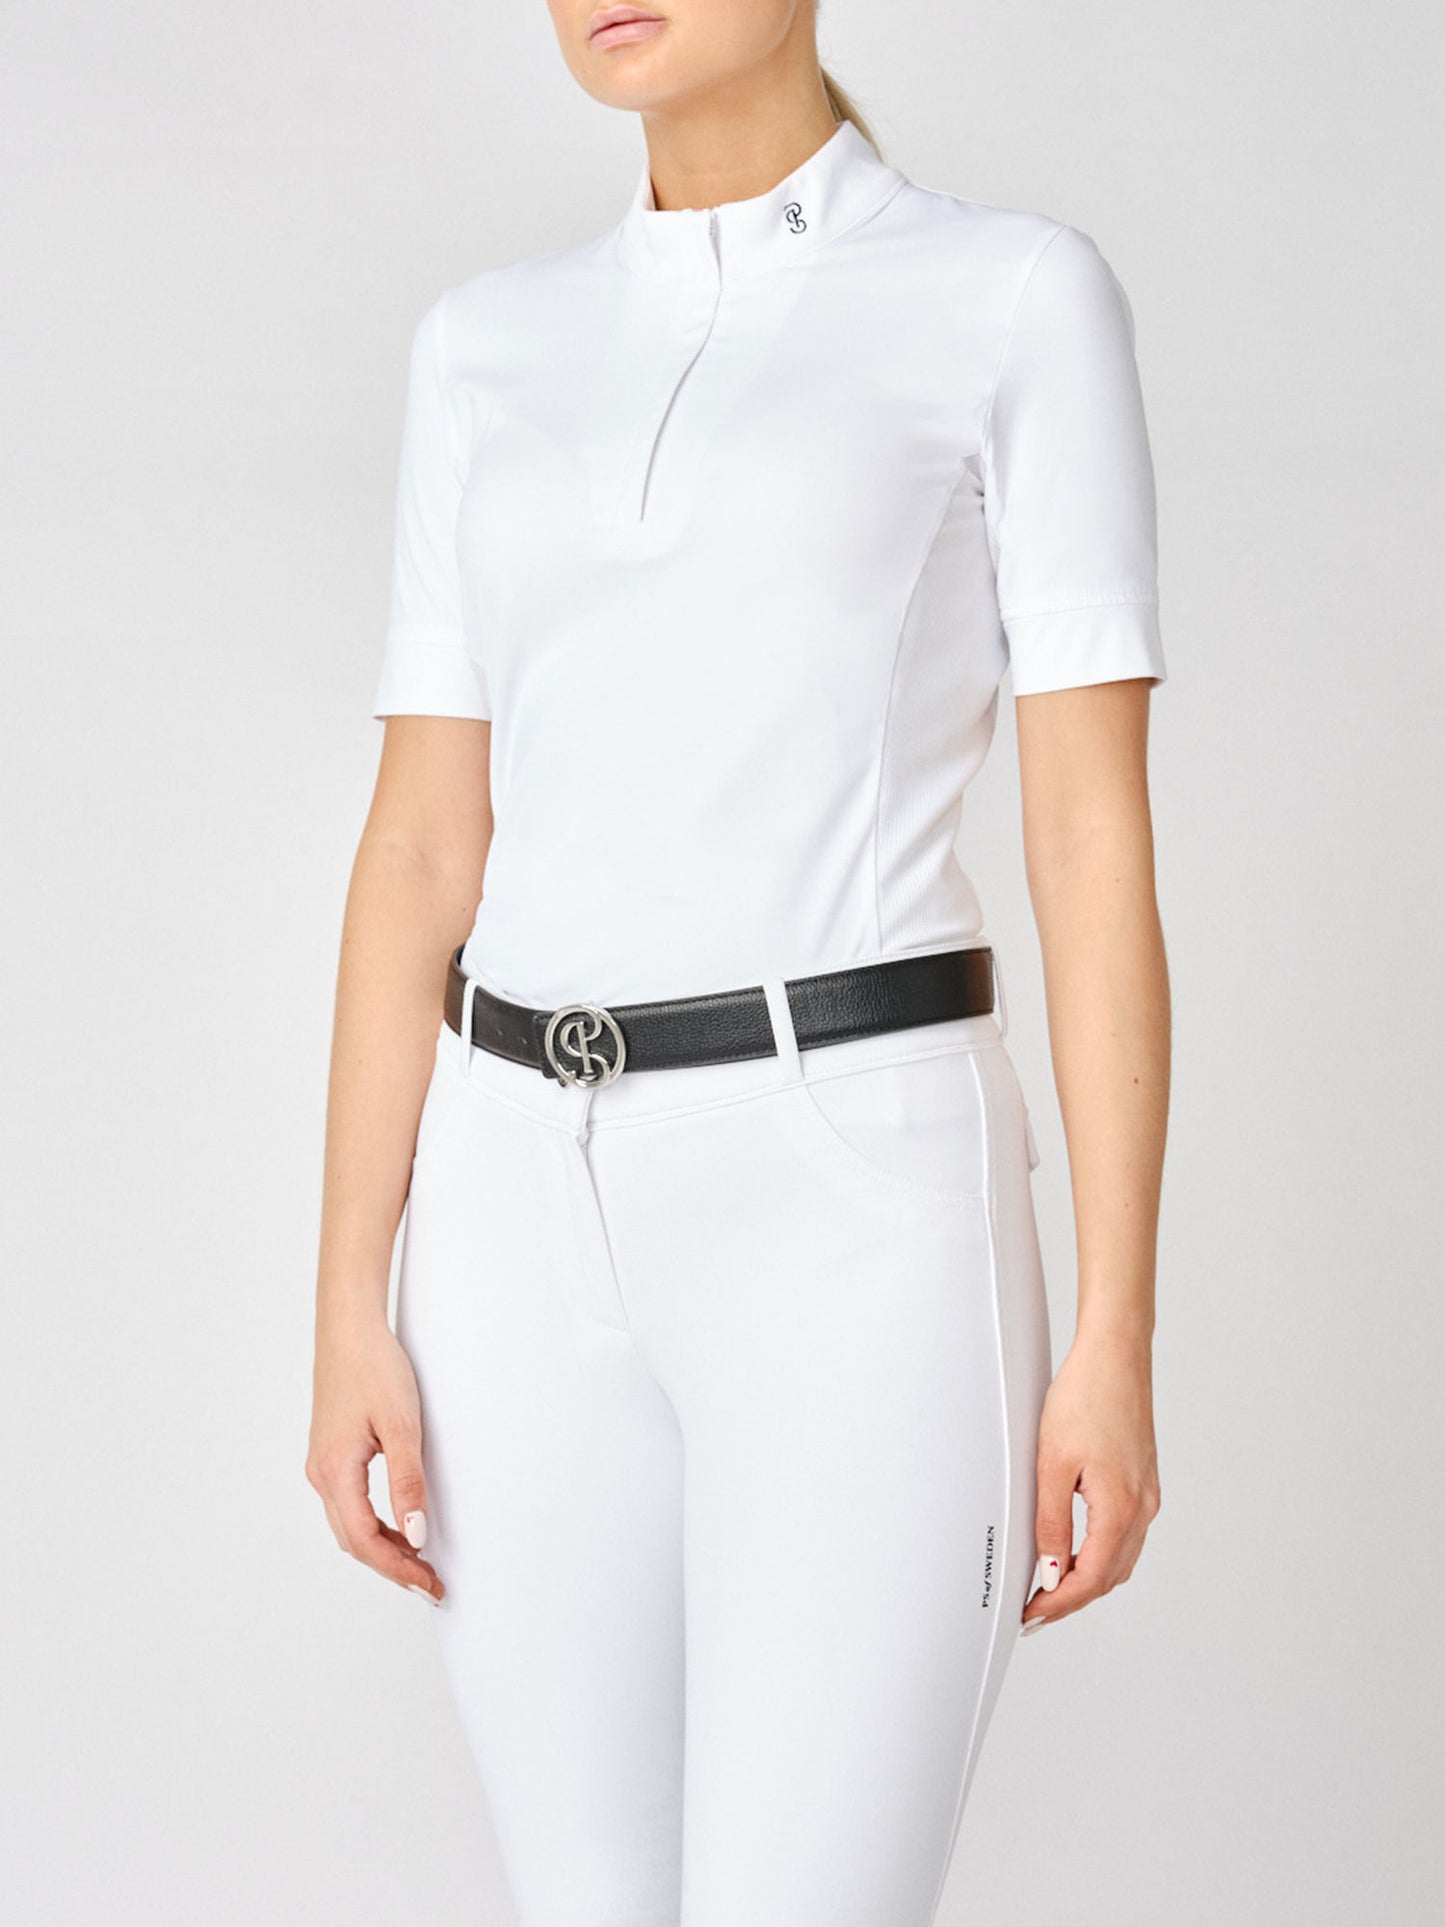 PSOS Irma S/S Competition Shirt, White